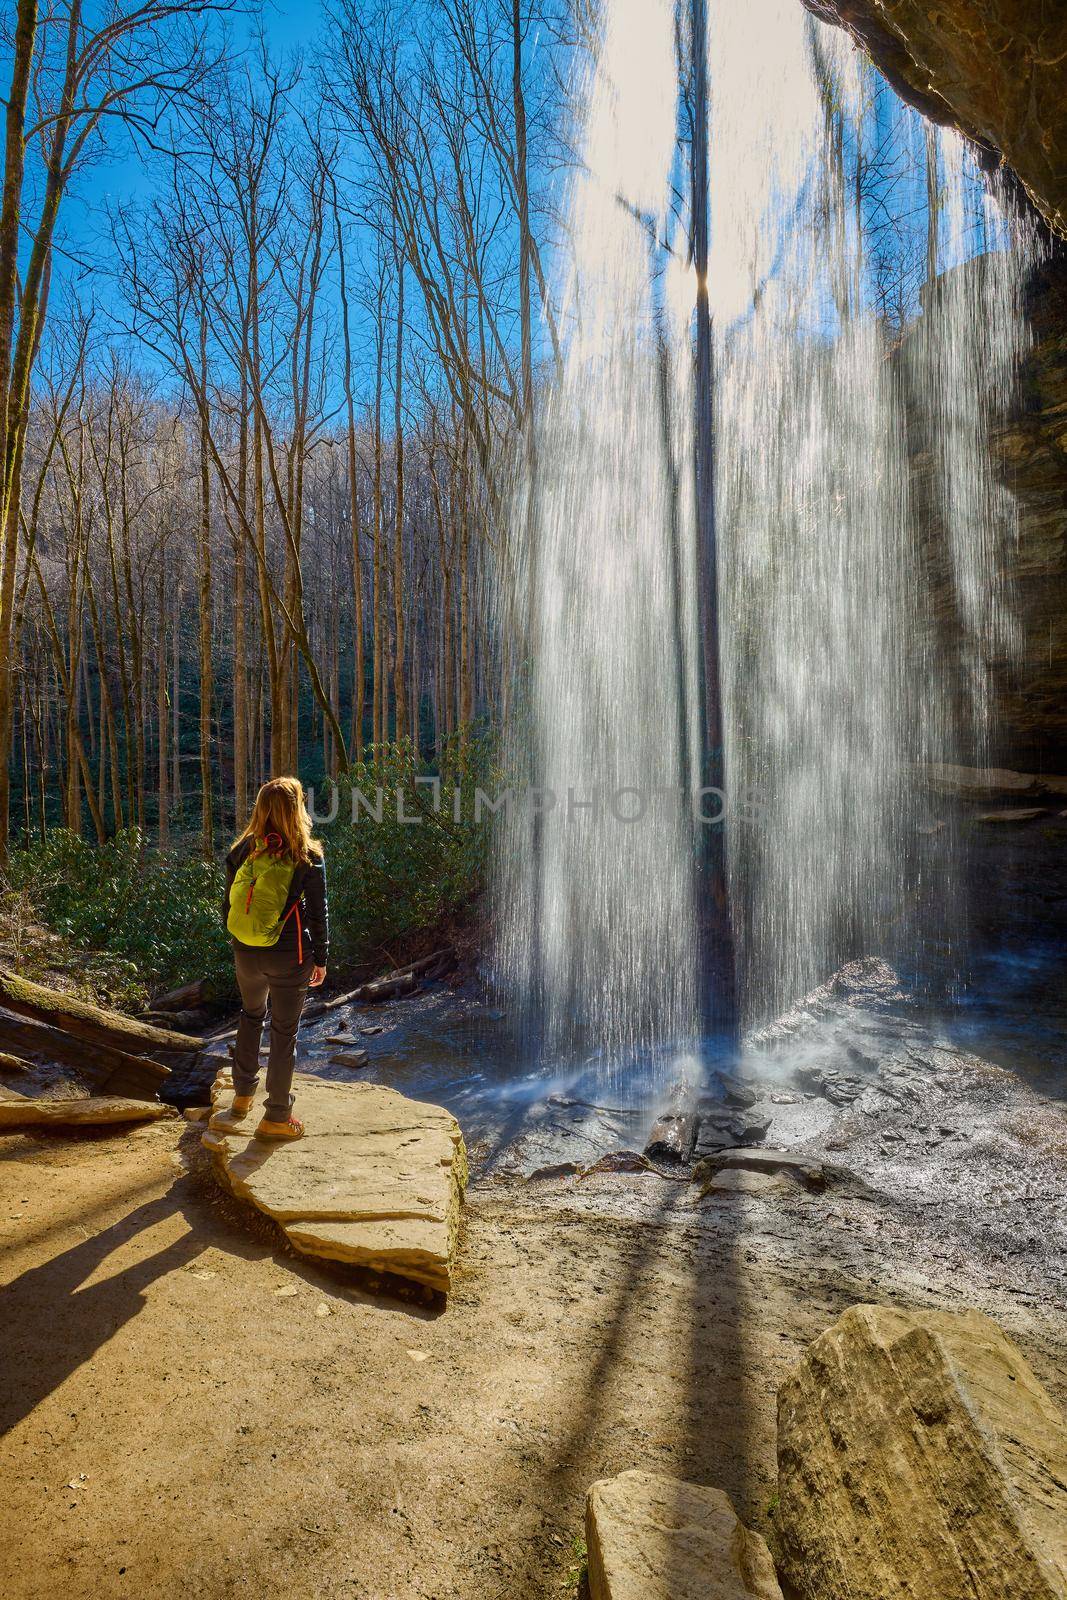 Woman standing near Moore Cove Waterfall in Pisgah National Forest near Brevard NC.